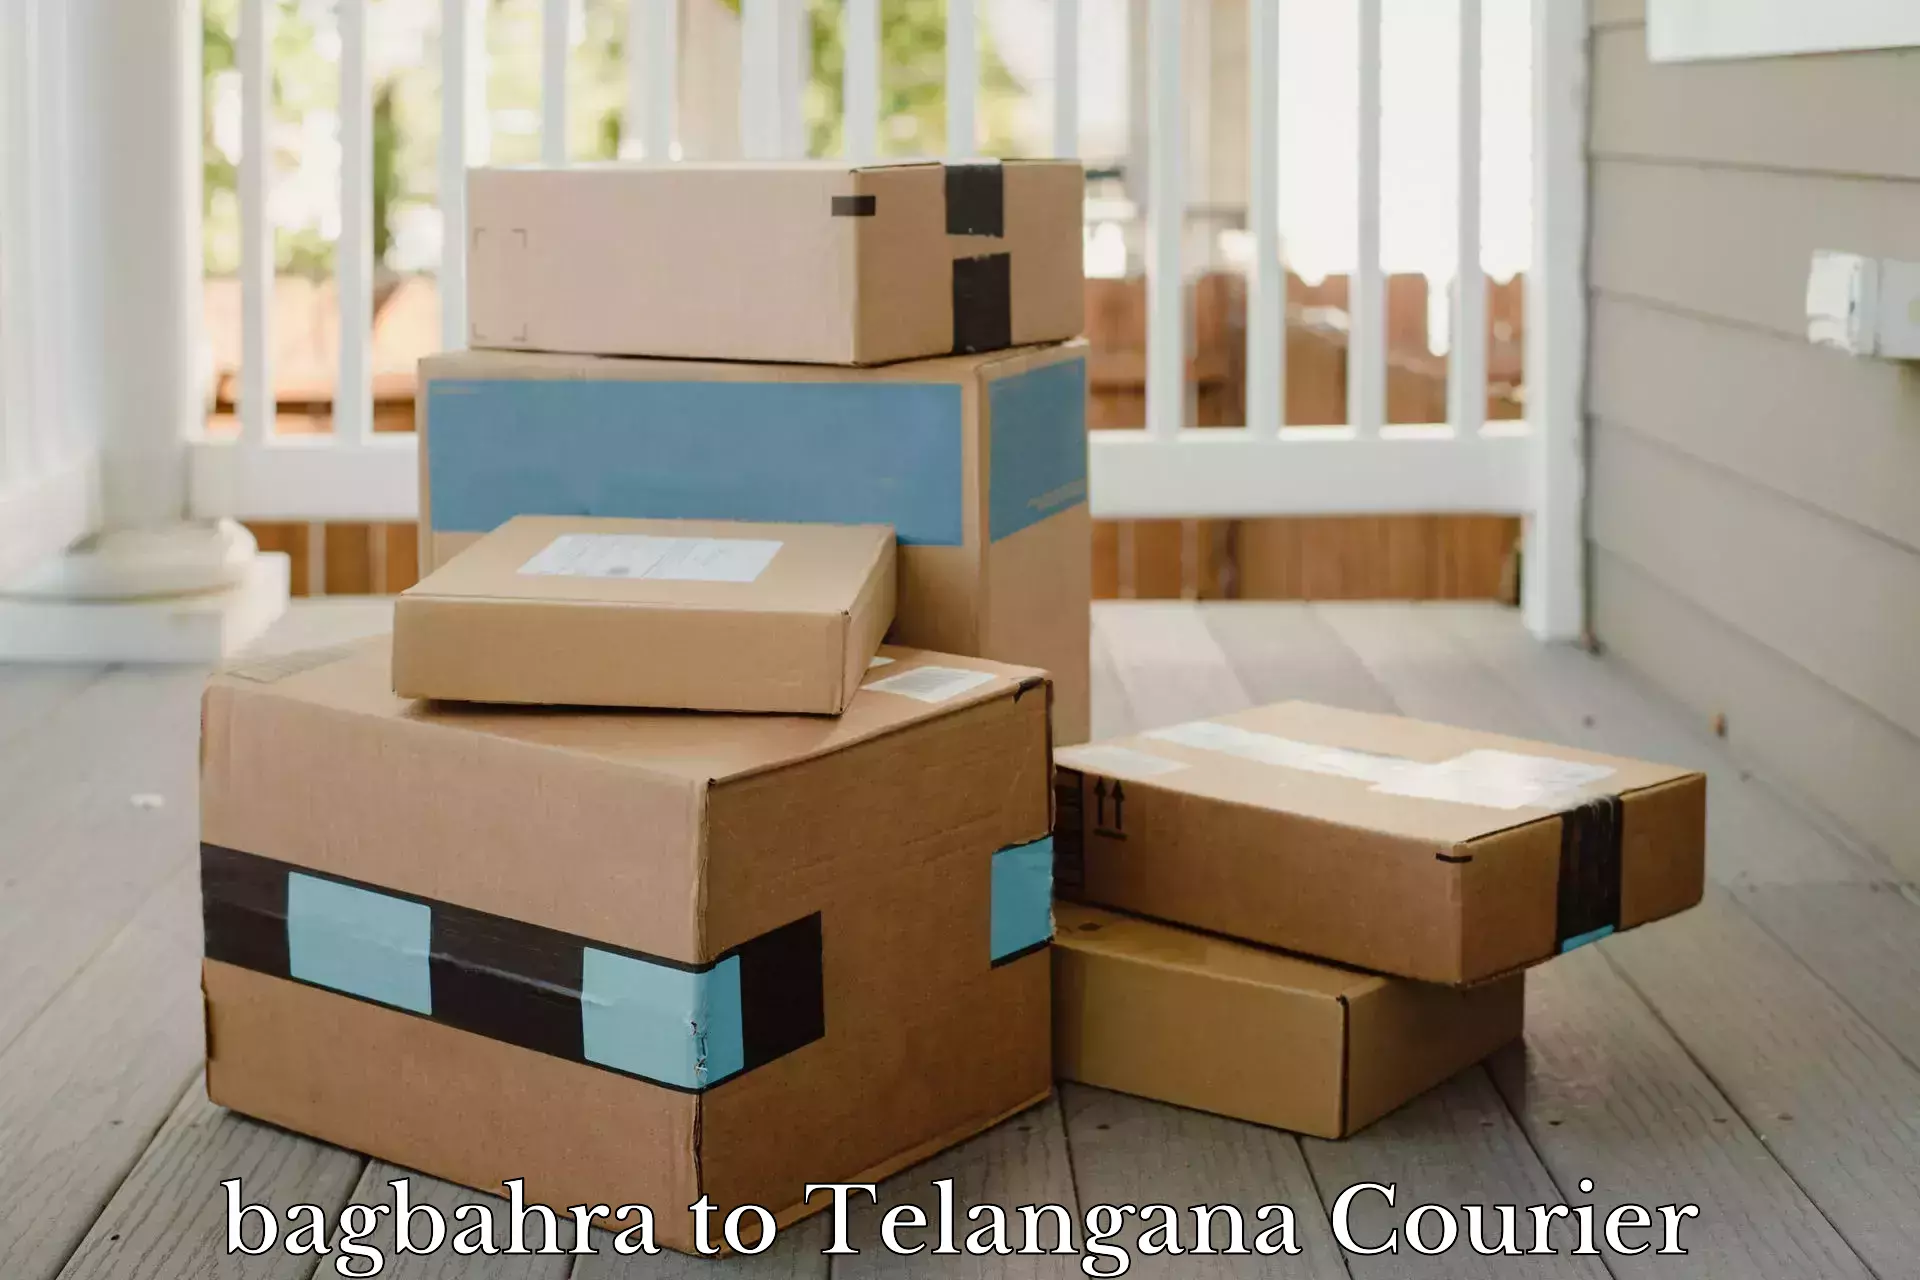 Parcel delivery automation in bagbahra to Telangana